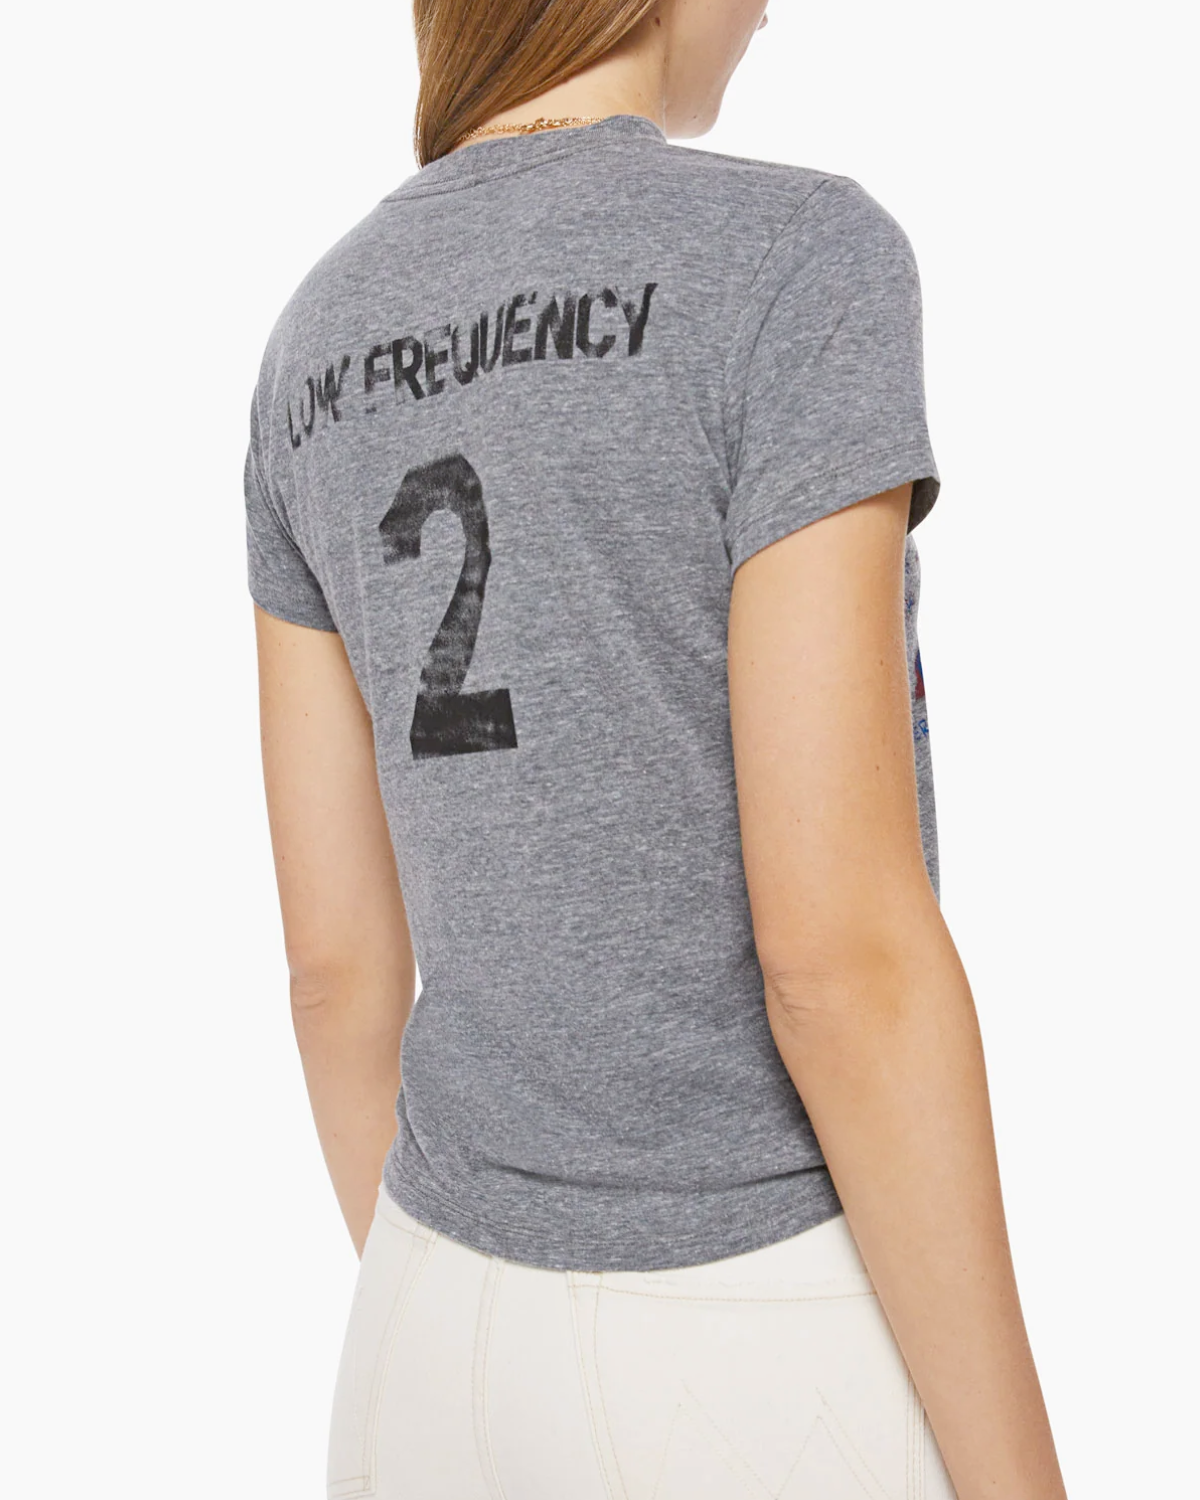 The Sinful Tee (Low Frequency)